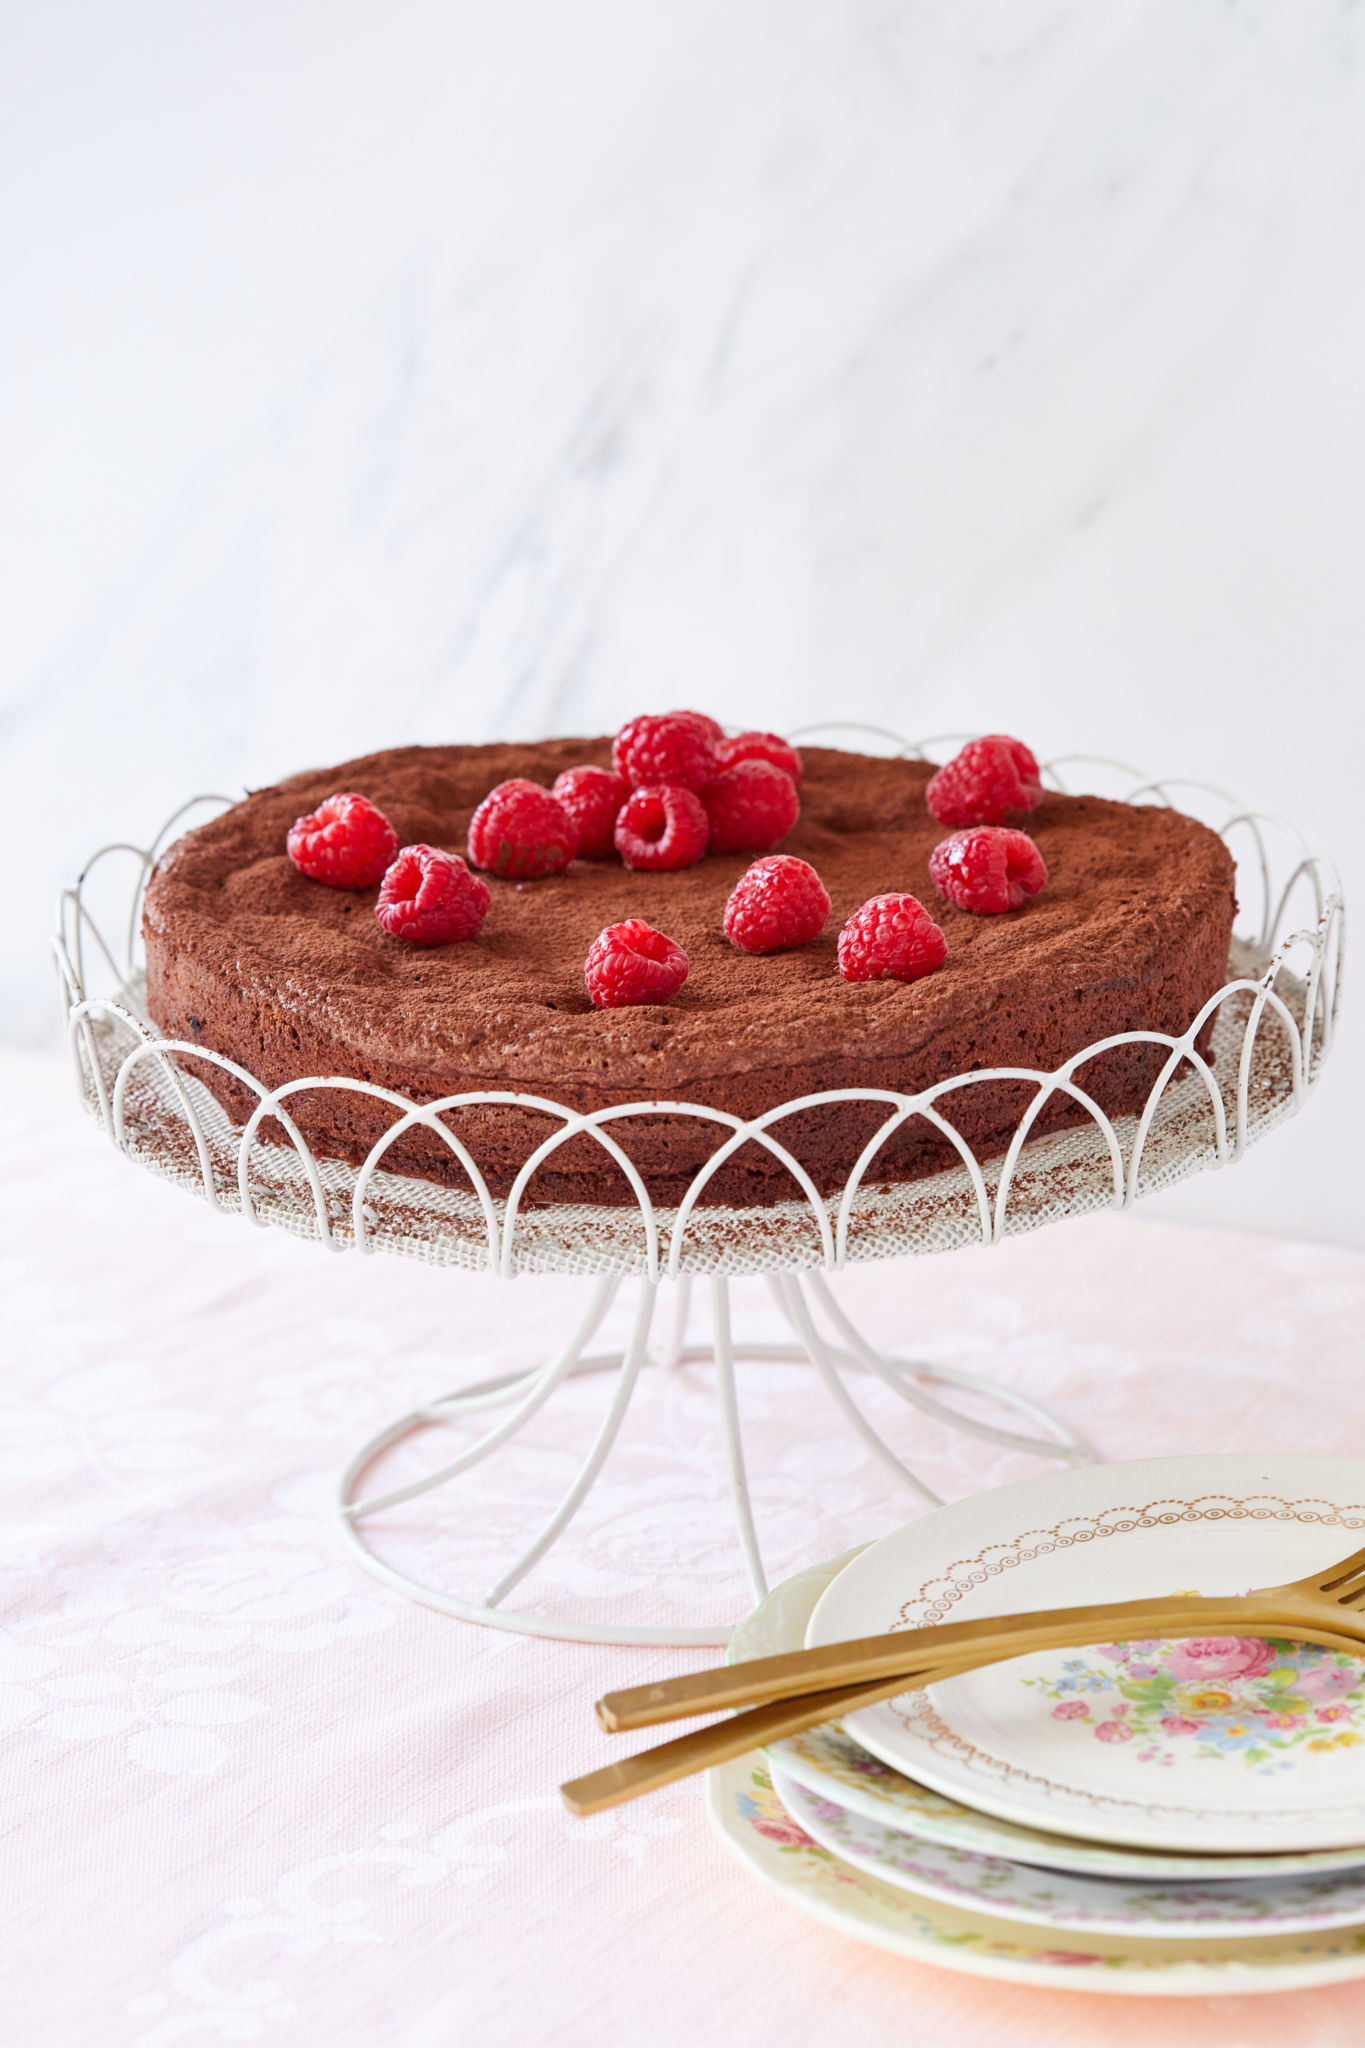 A Flourless Chocolate Almond Torte with raspberries, presented on a cake stand.